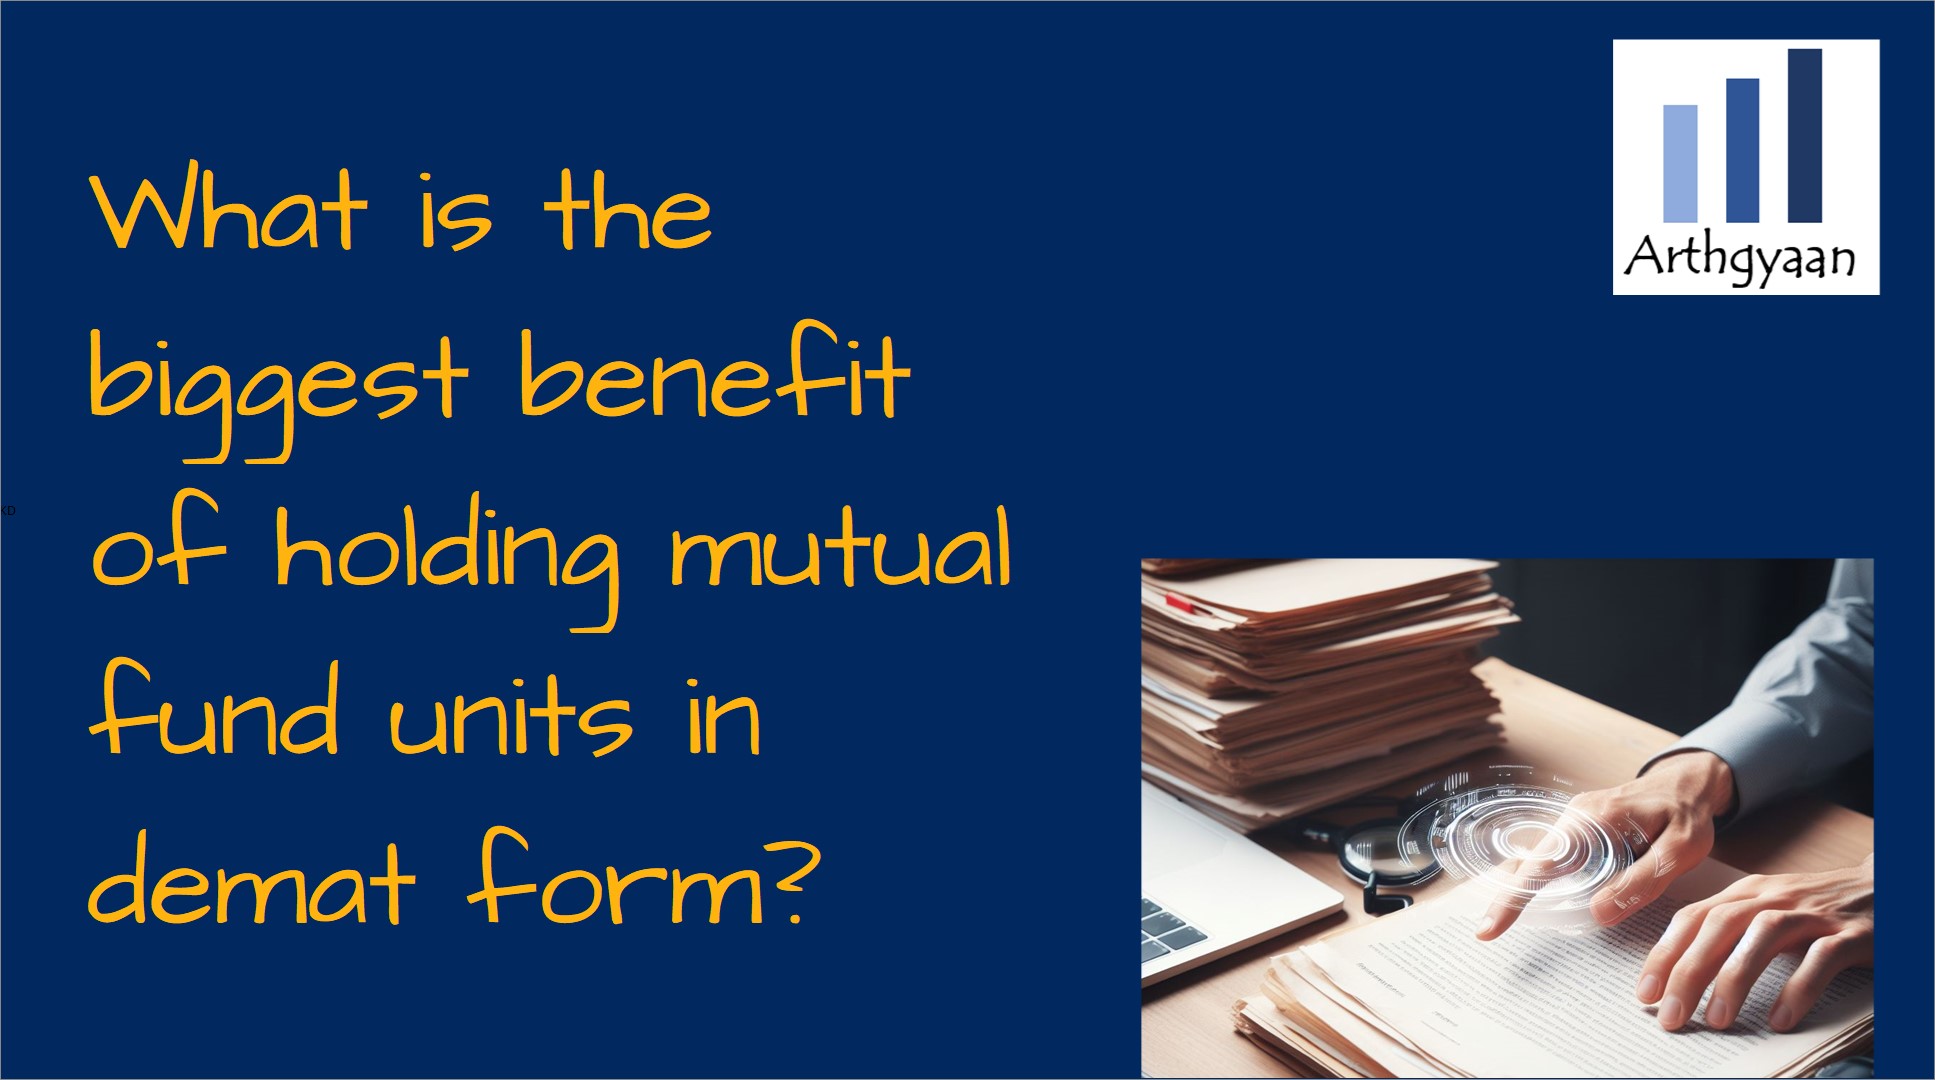 What is the biggest benefit of holding mutual fund units in demat form?